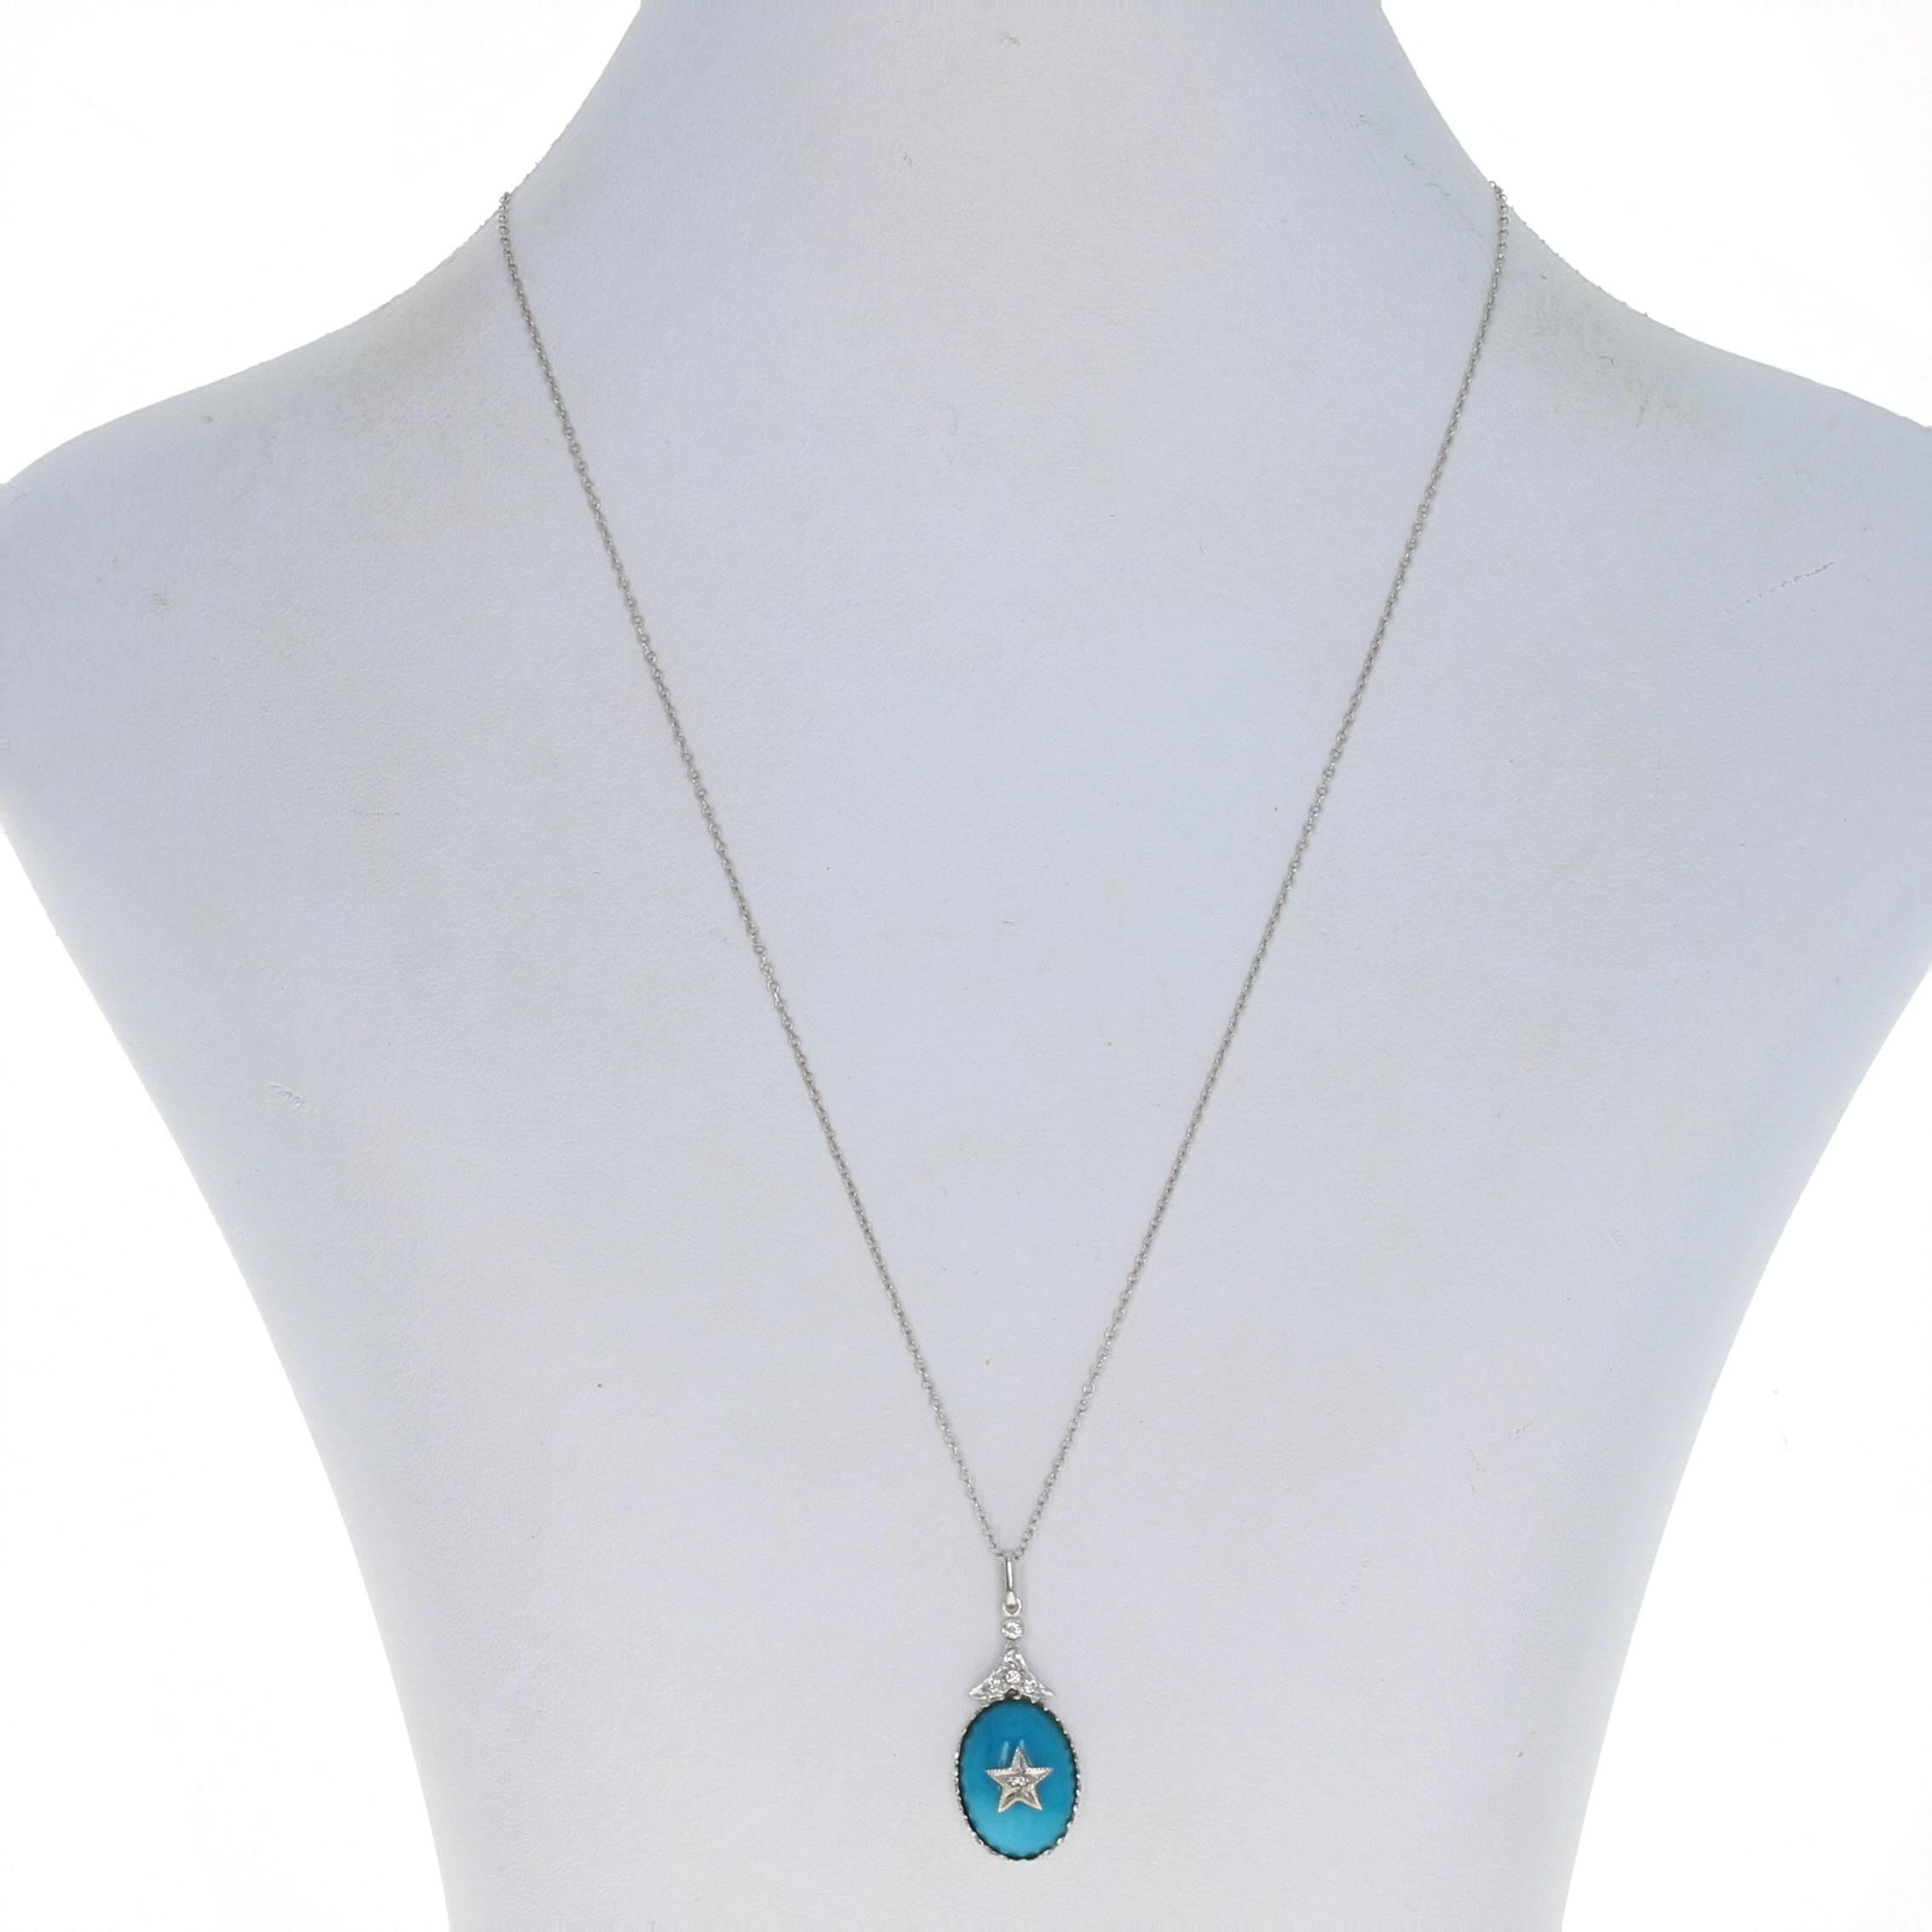 Metal Content: 14k White Gold

Stone Information: 
Genuine Turquoise
Treatment: Routinely Enhanced
Cut: Oval Cabochon
Color: Blue

Natural Diamonds
Total Carats: .10ctw
Cut: Round Brilliant
Color: G - H
Clarity: SI1 - SI2

Style: Pendant
Chain